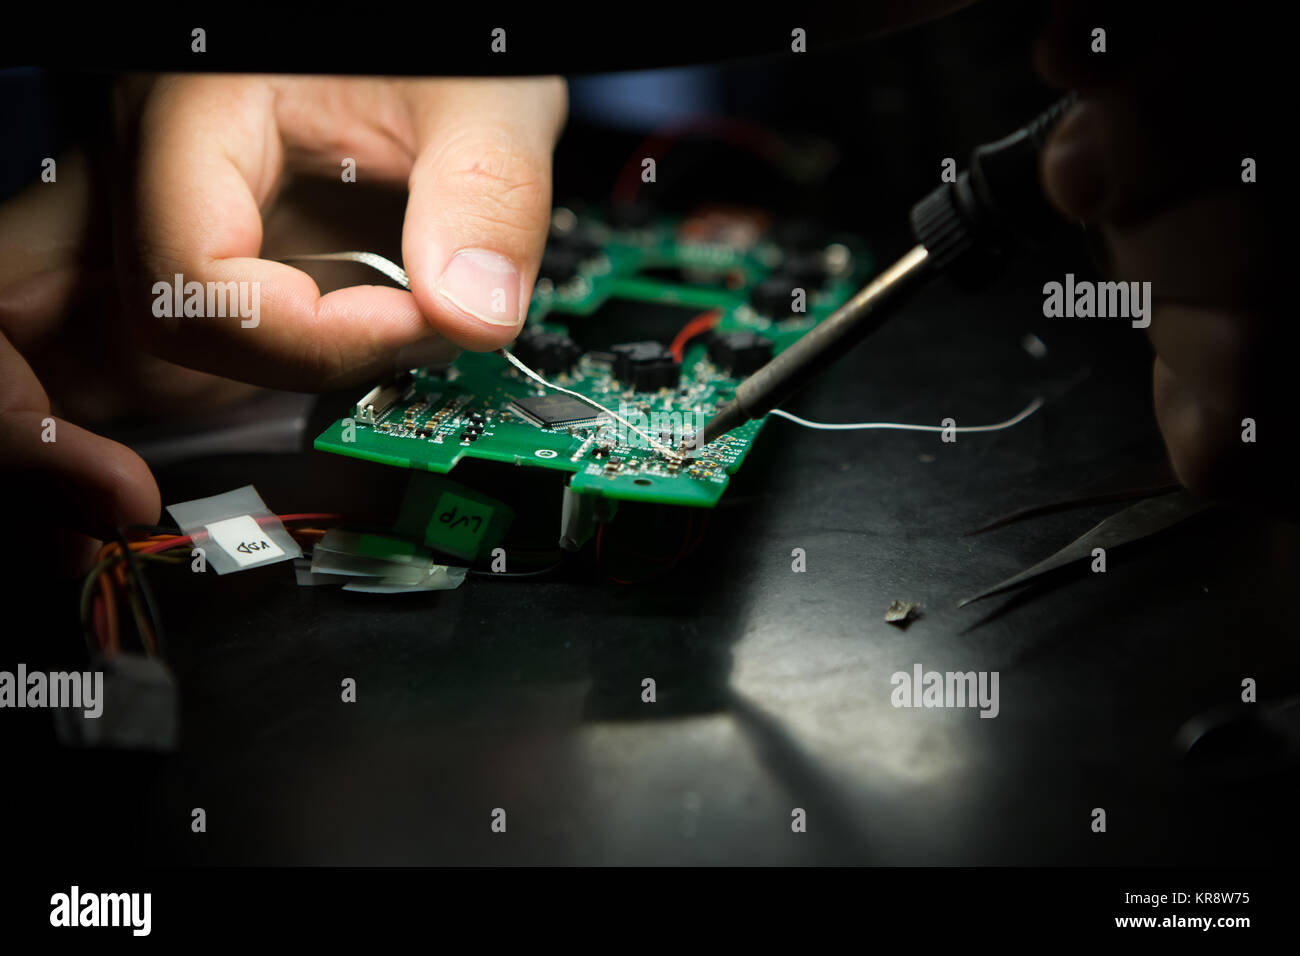 An engineer is working on an electronic device Stock Photo